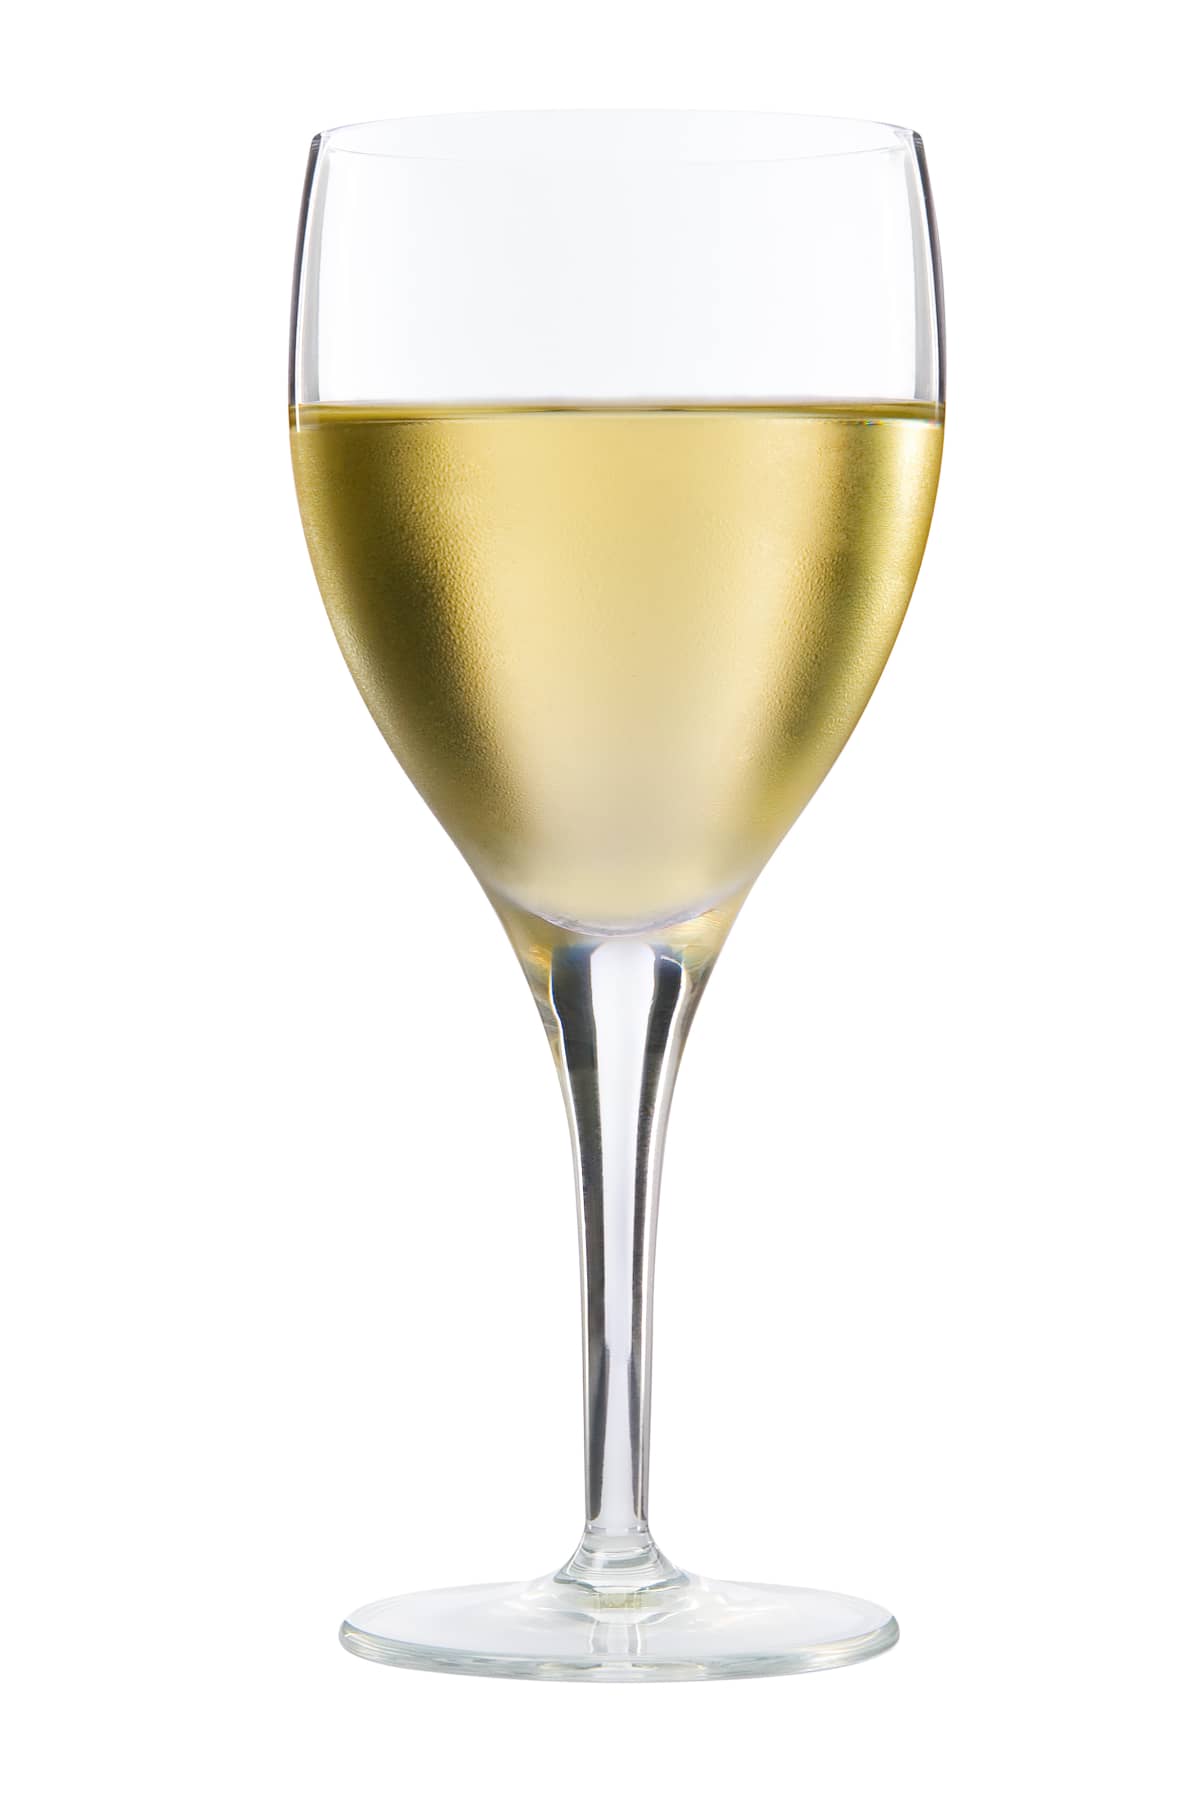 Wine in a wine glass on white background